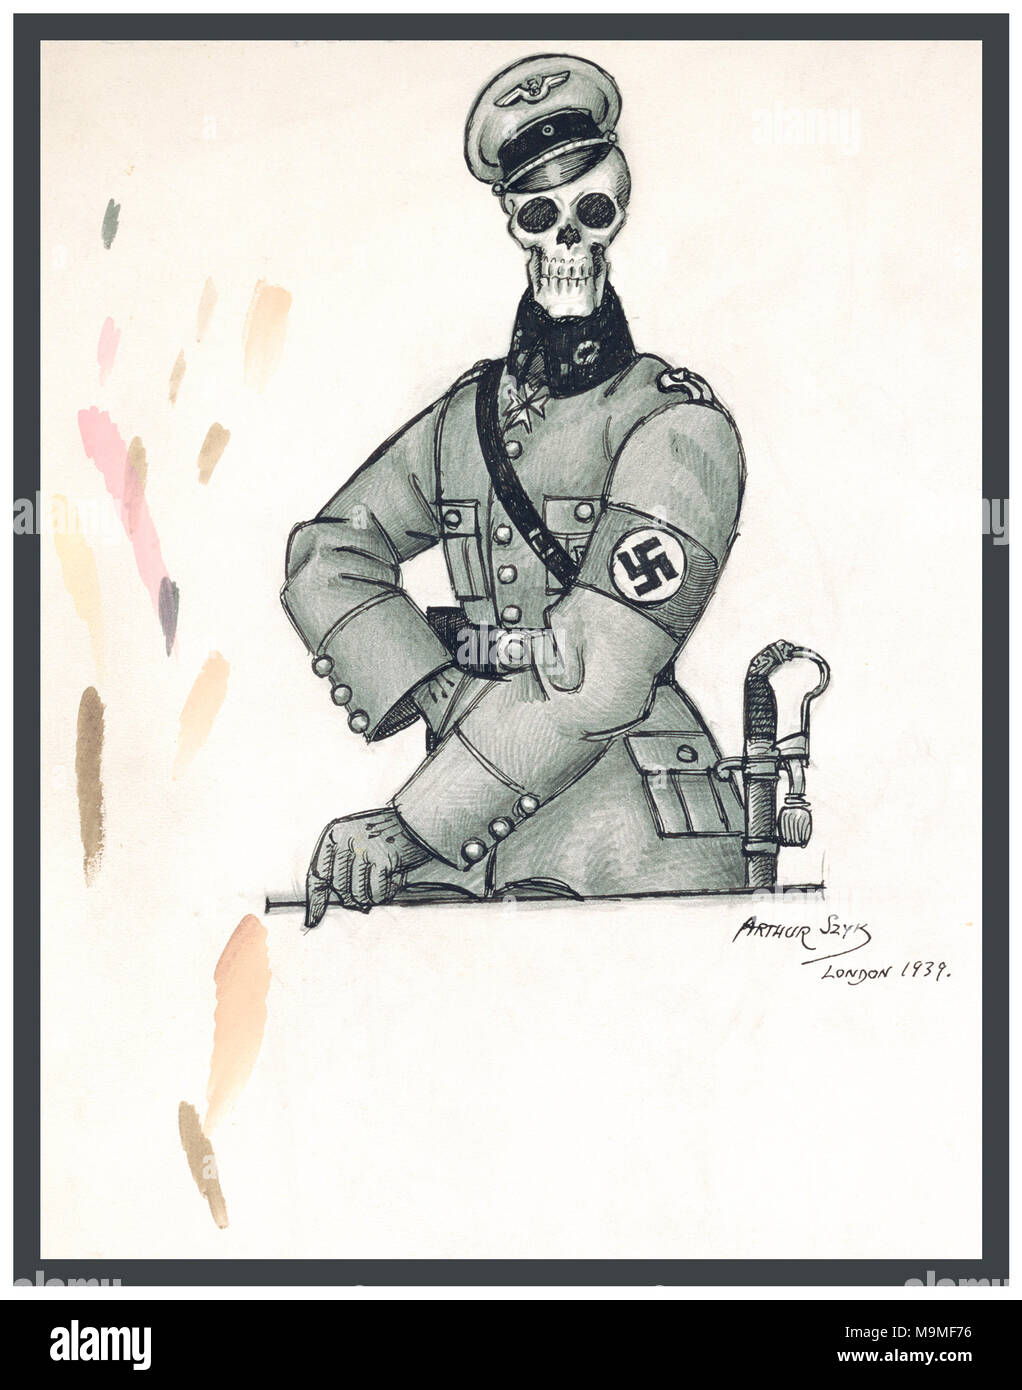 WW2 Graphic Cartoon poster of Death as a SS Nazi soldier The arrogant grimace of Fascist authority suited to the icon of Death. Poland, the first to be cut down by the power of the Grim Reaper. Hundreds of thousands of Poles, both Gentile and Jewish perished during Hitler’s Reign of Terror. Stock Photo